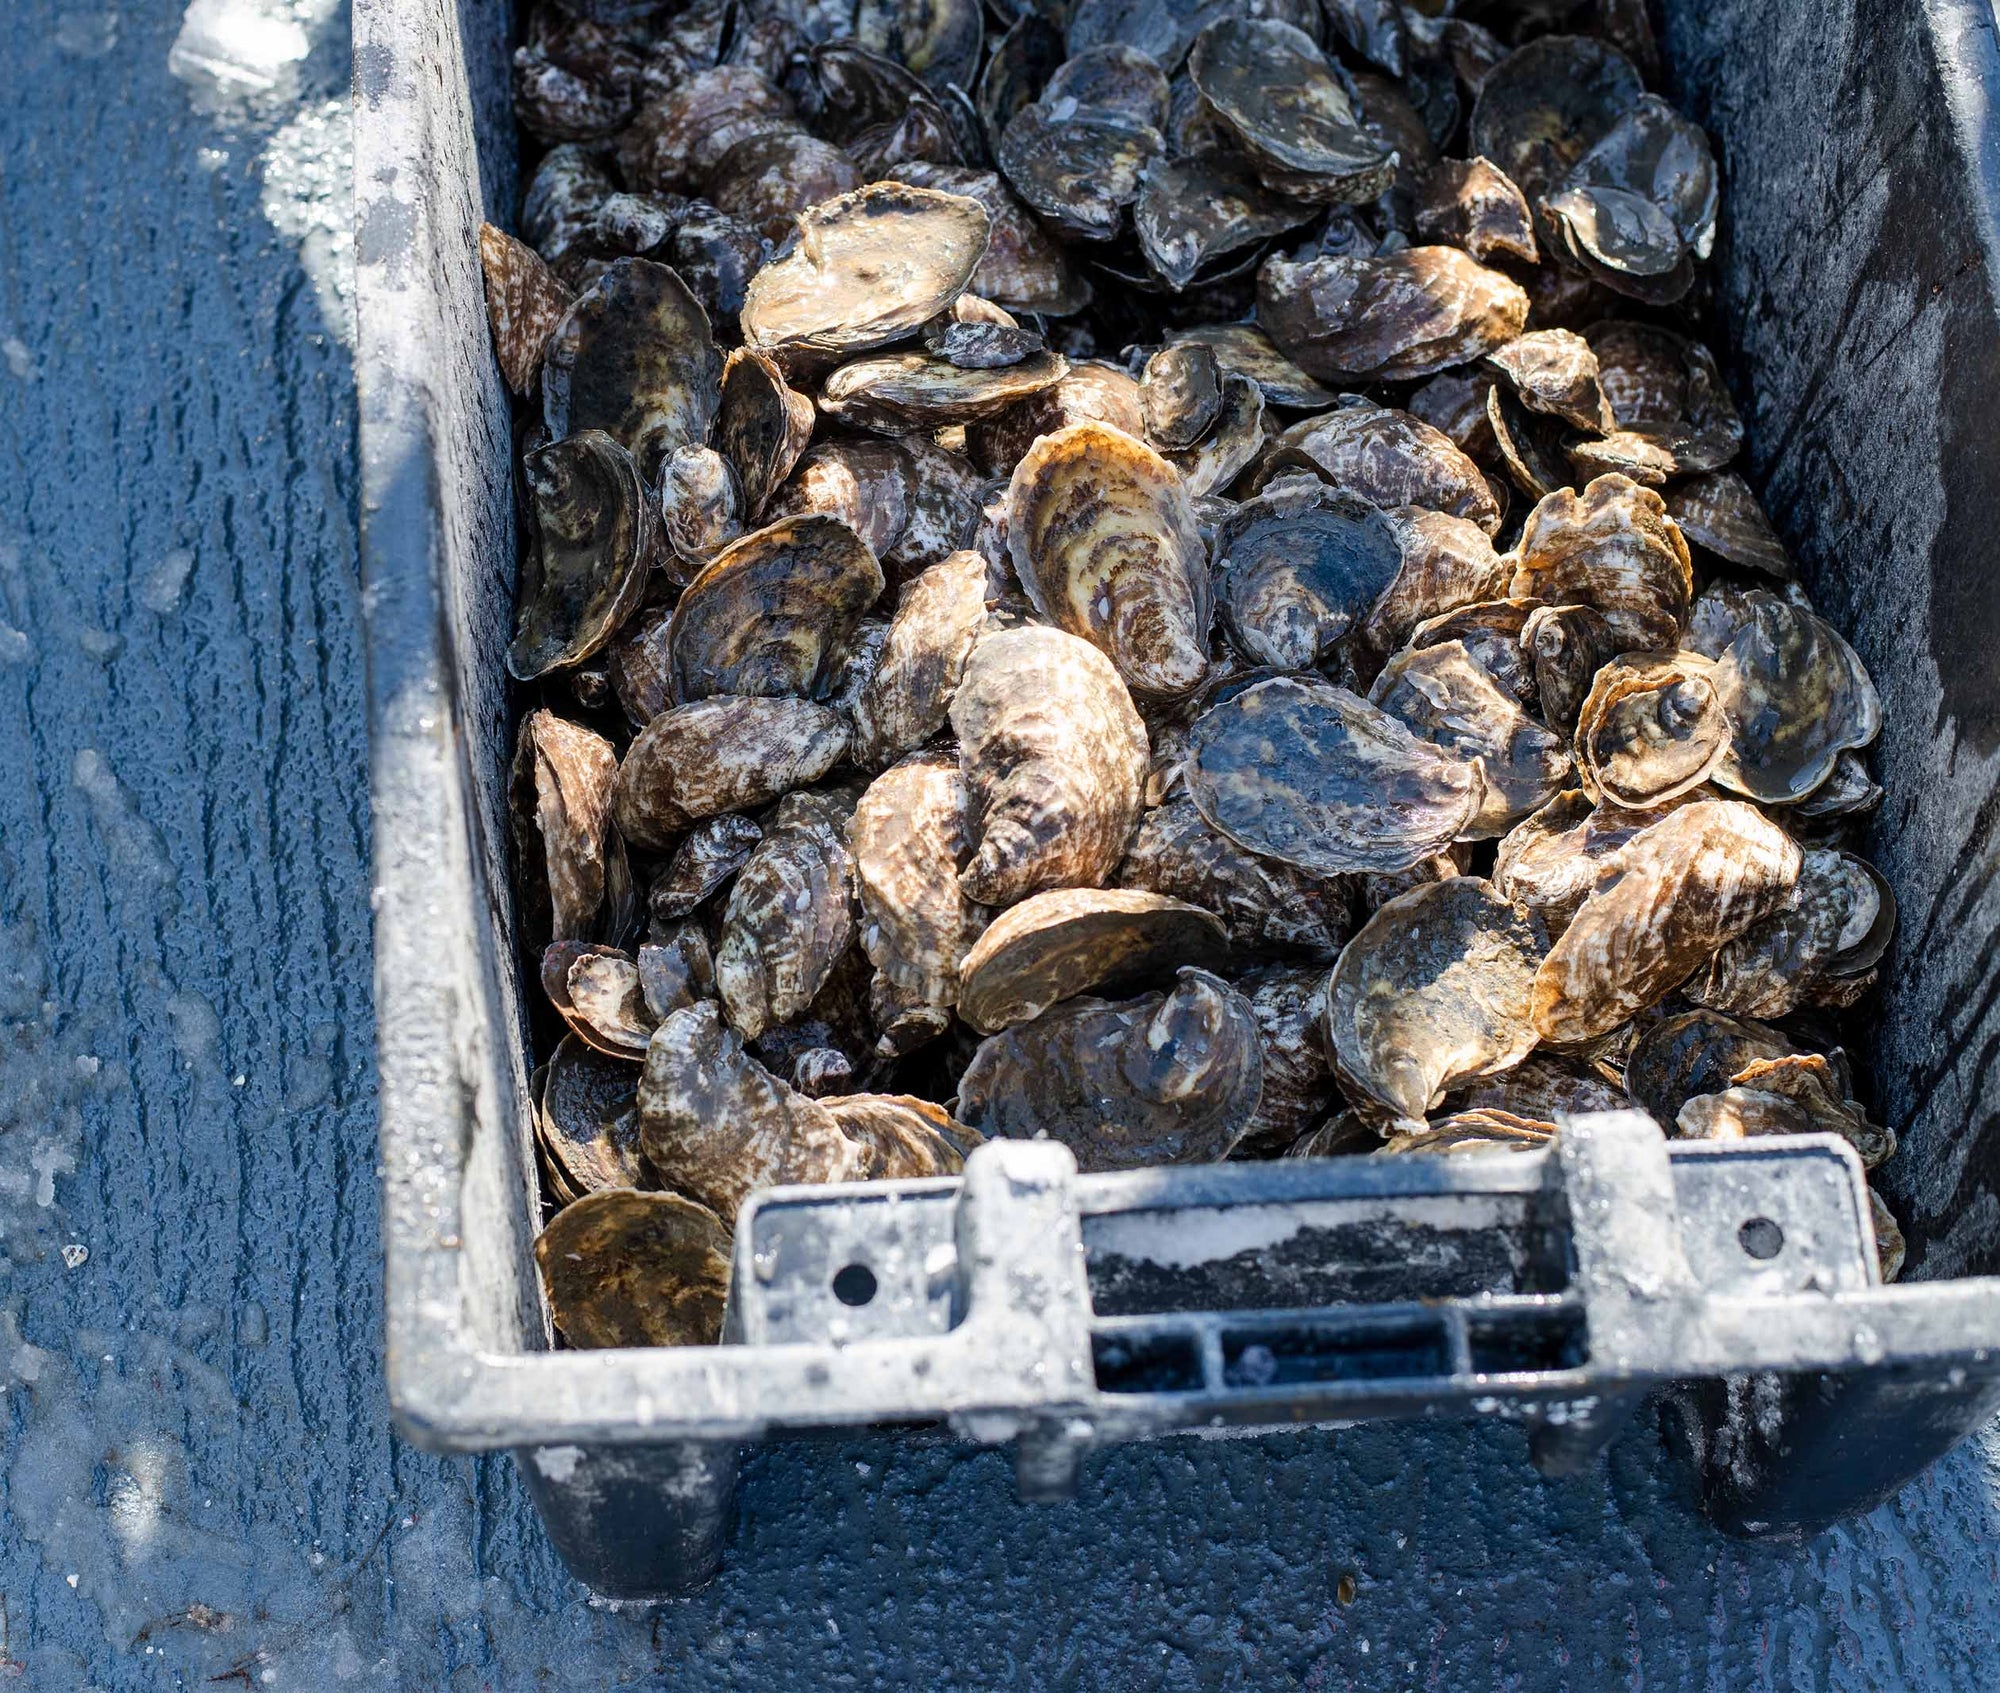 Riptide Oysters from Westport, MA